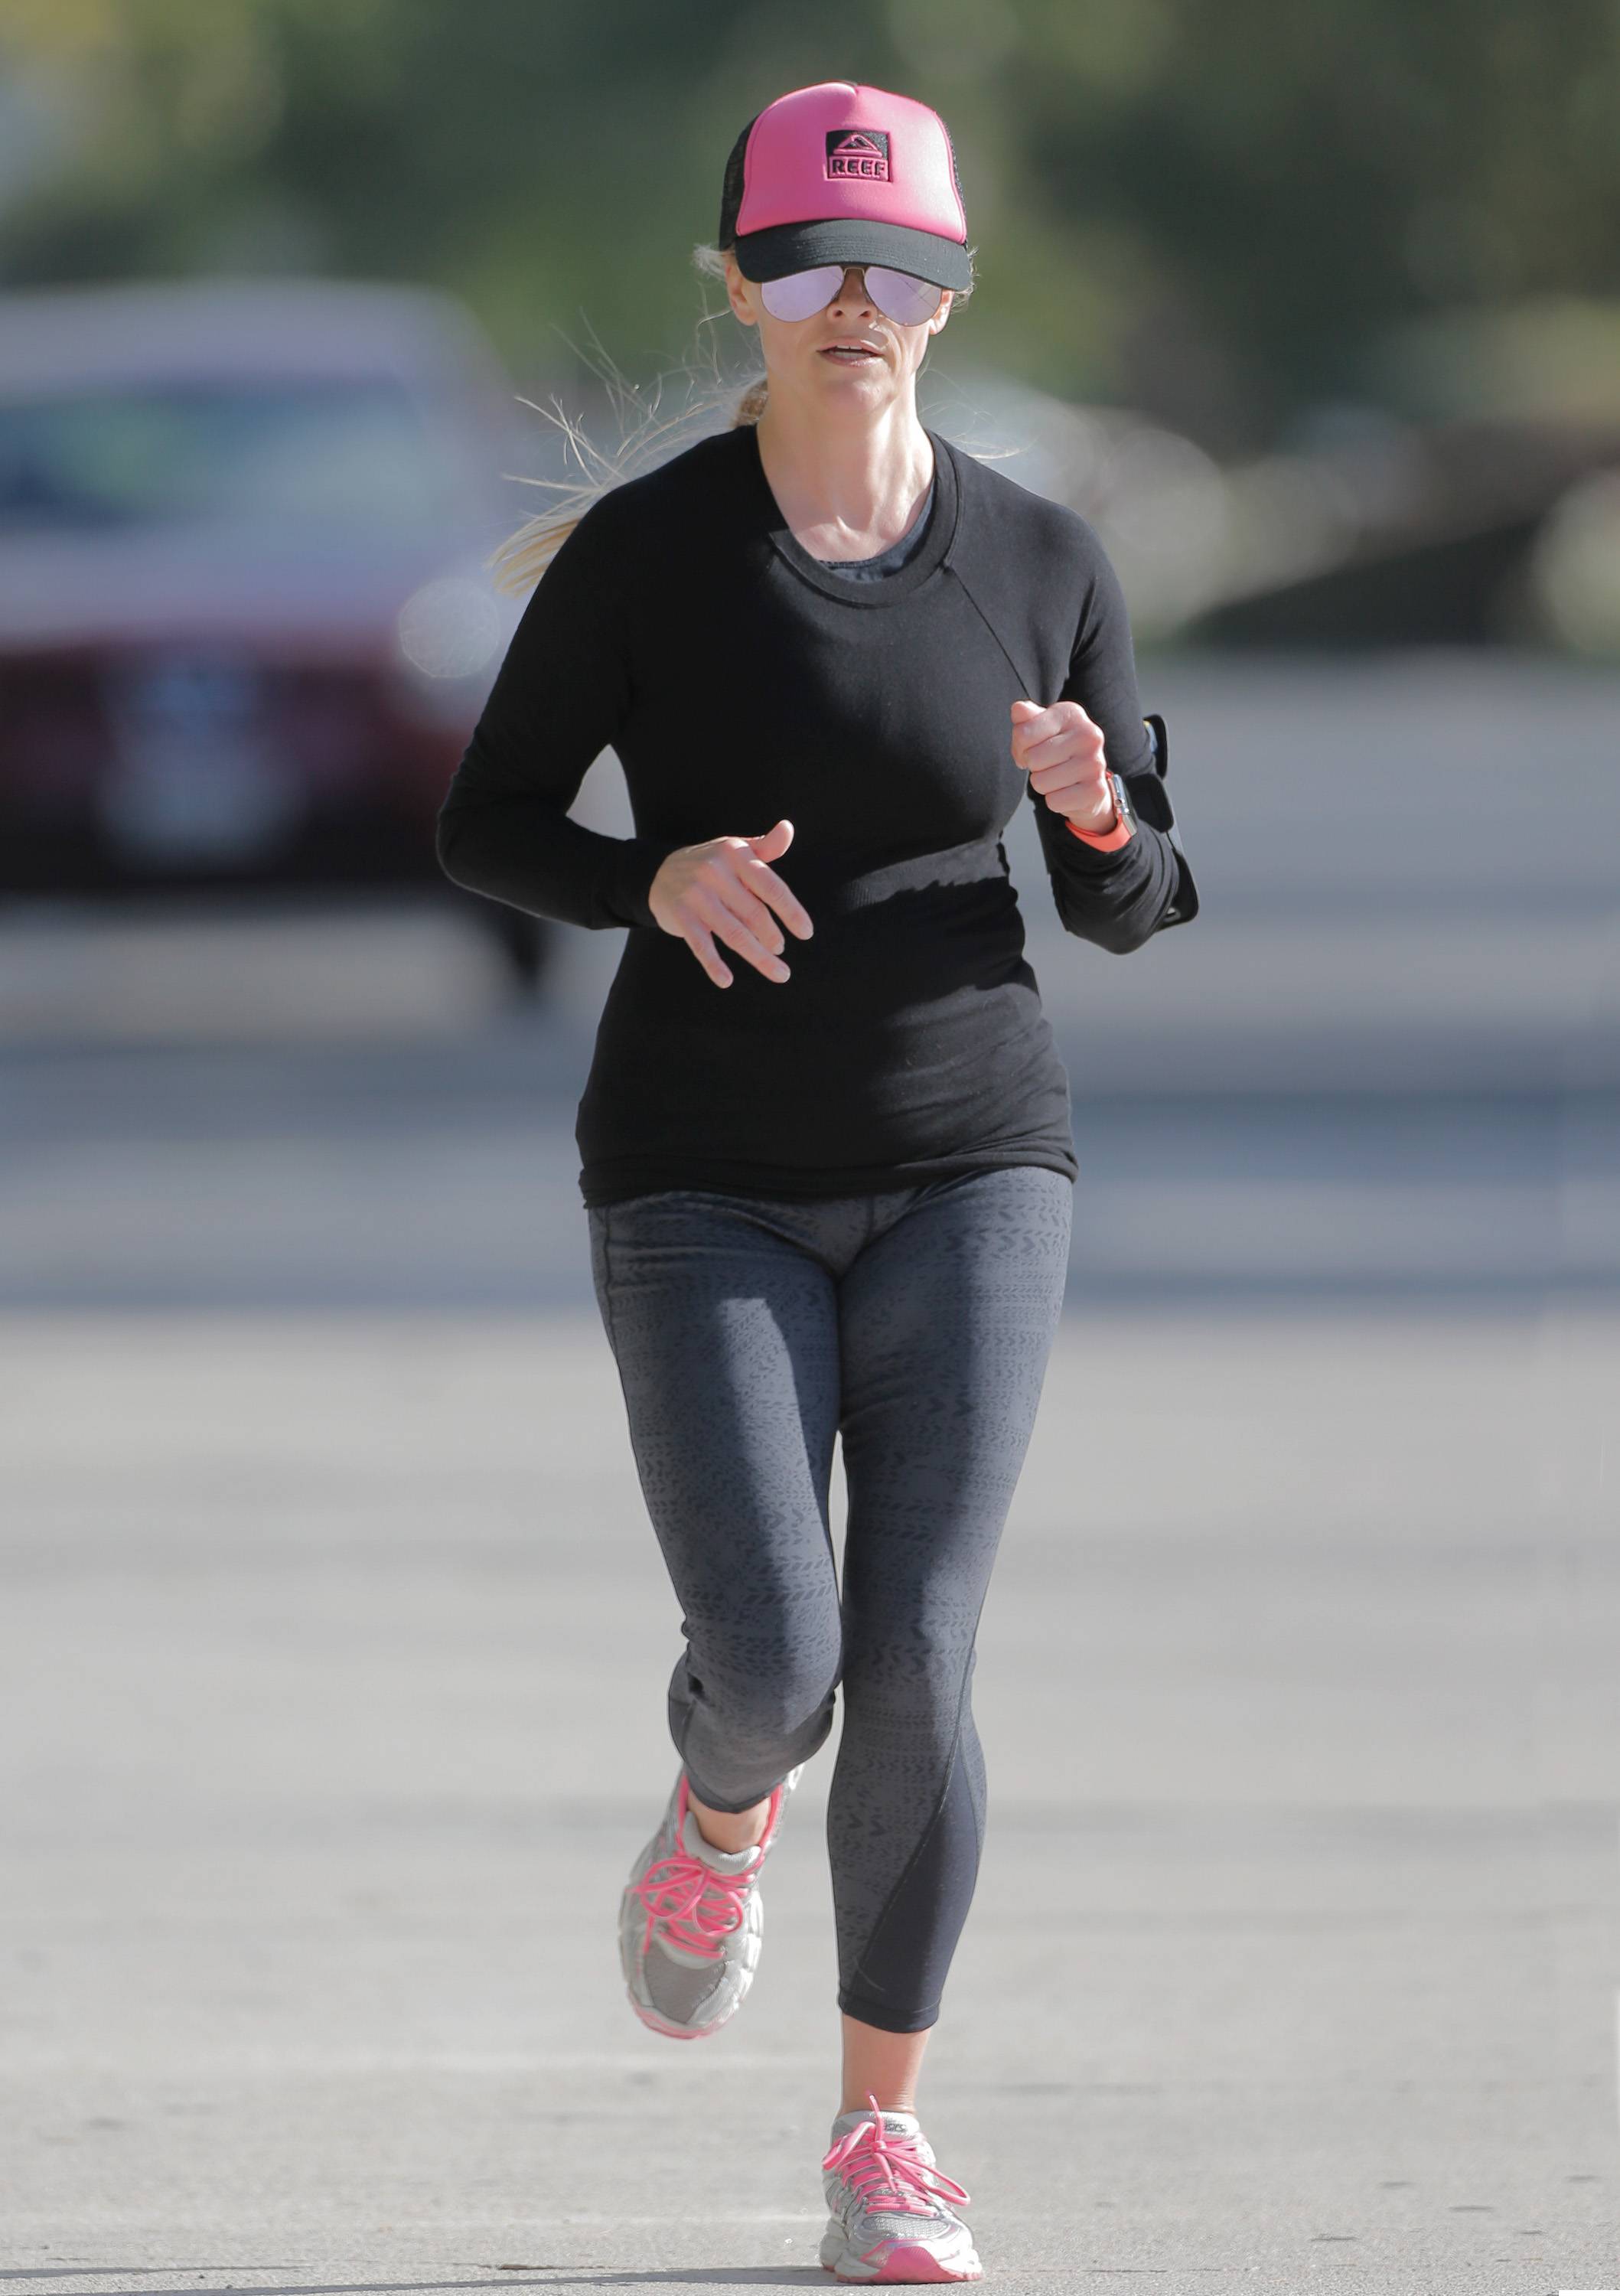 Reese Witherspoon goes for her morning jog in LA 3/30/16.